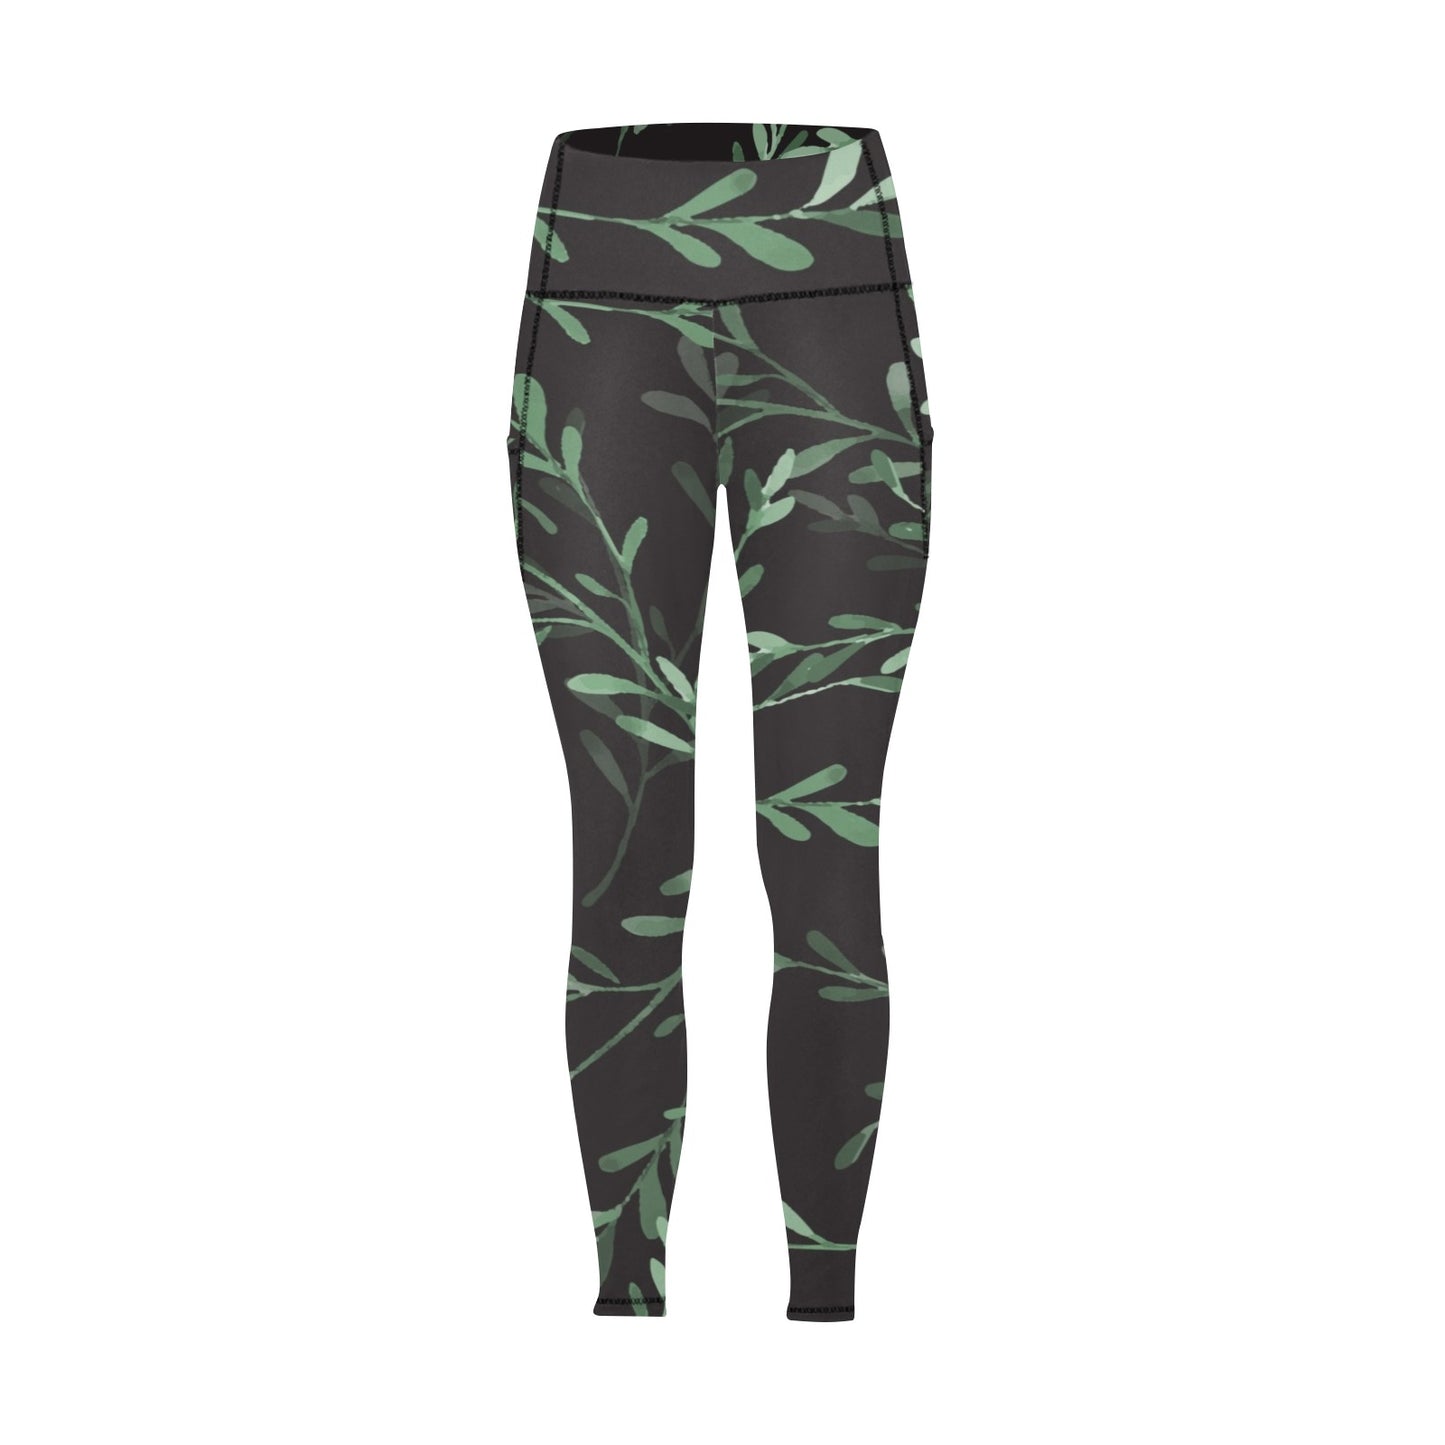 Delicate Leaves - Women's Leggings with Pockets Women's Leggings with Pockets S - 2XL Plants